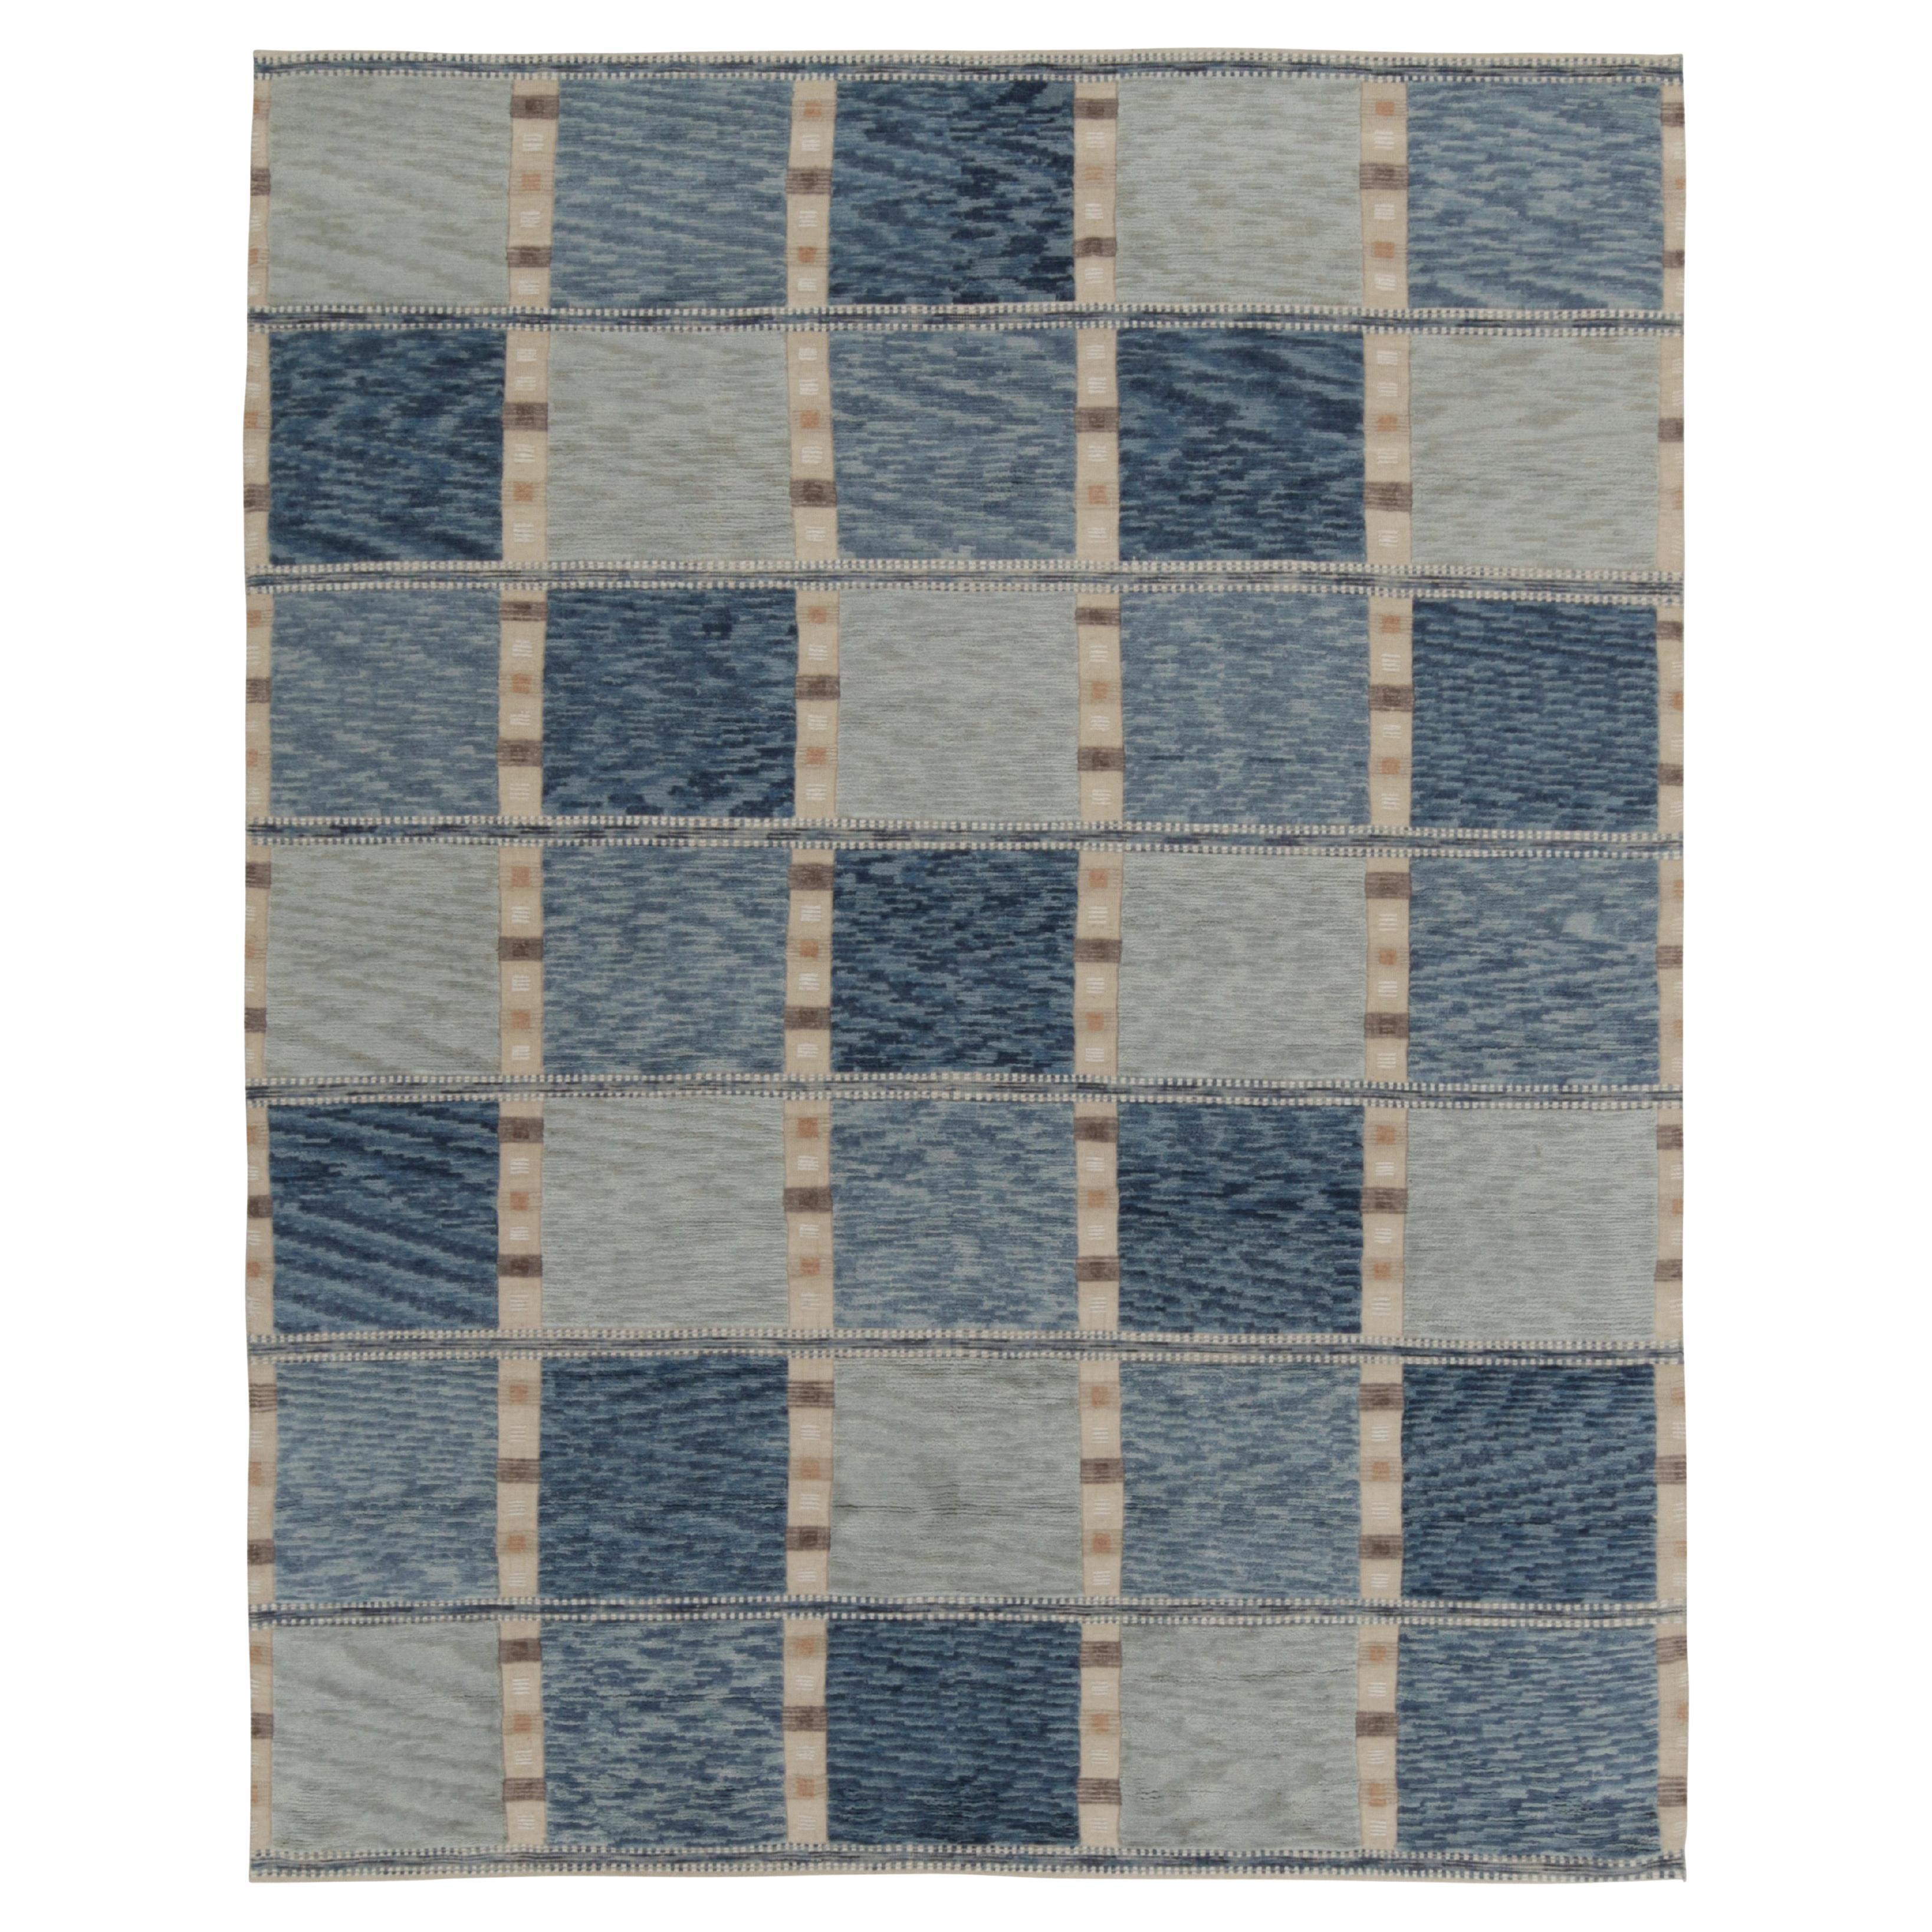 Rug & Kilim’s Scandinavian Style Rug in Blue and Beige-Brown Geometric Patterns For Sale